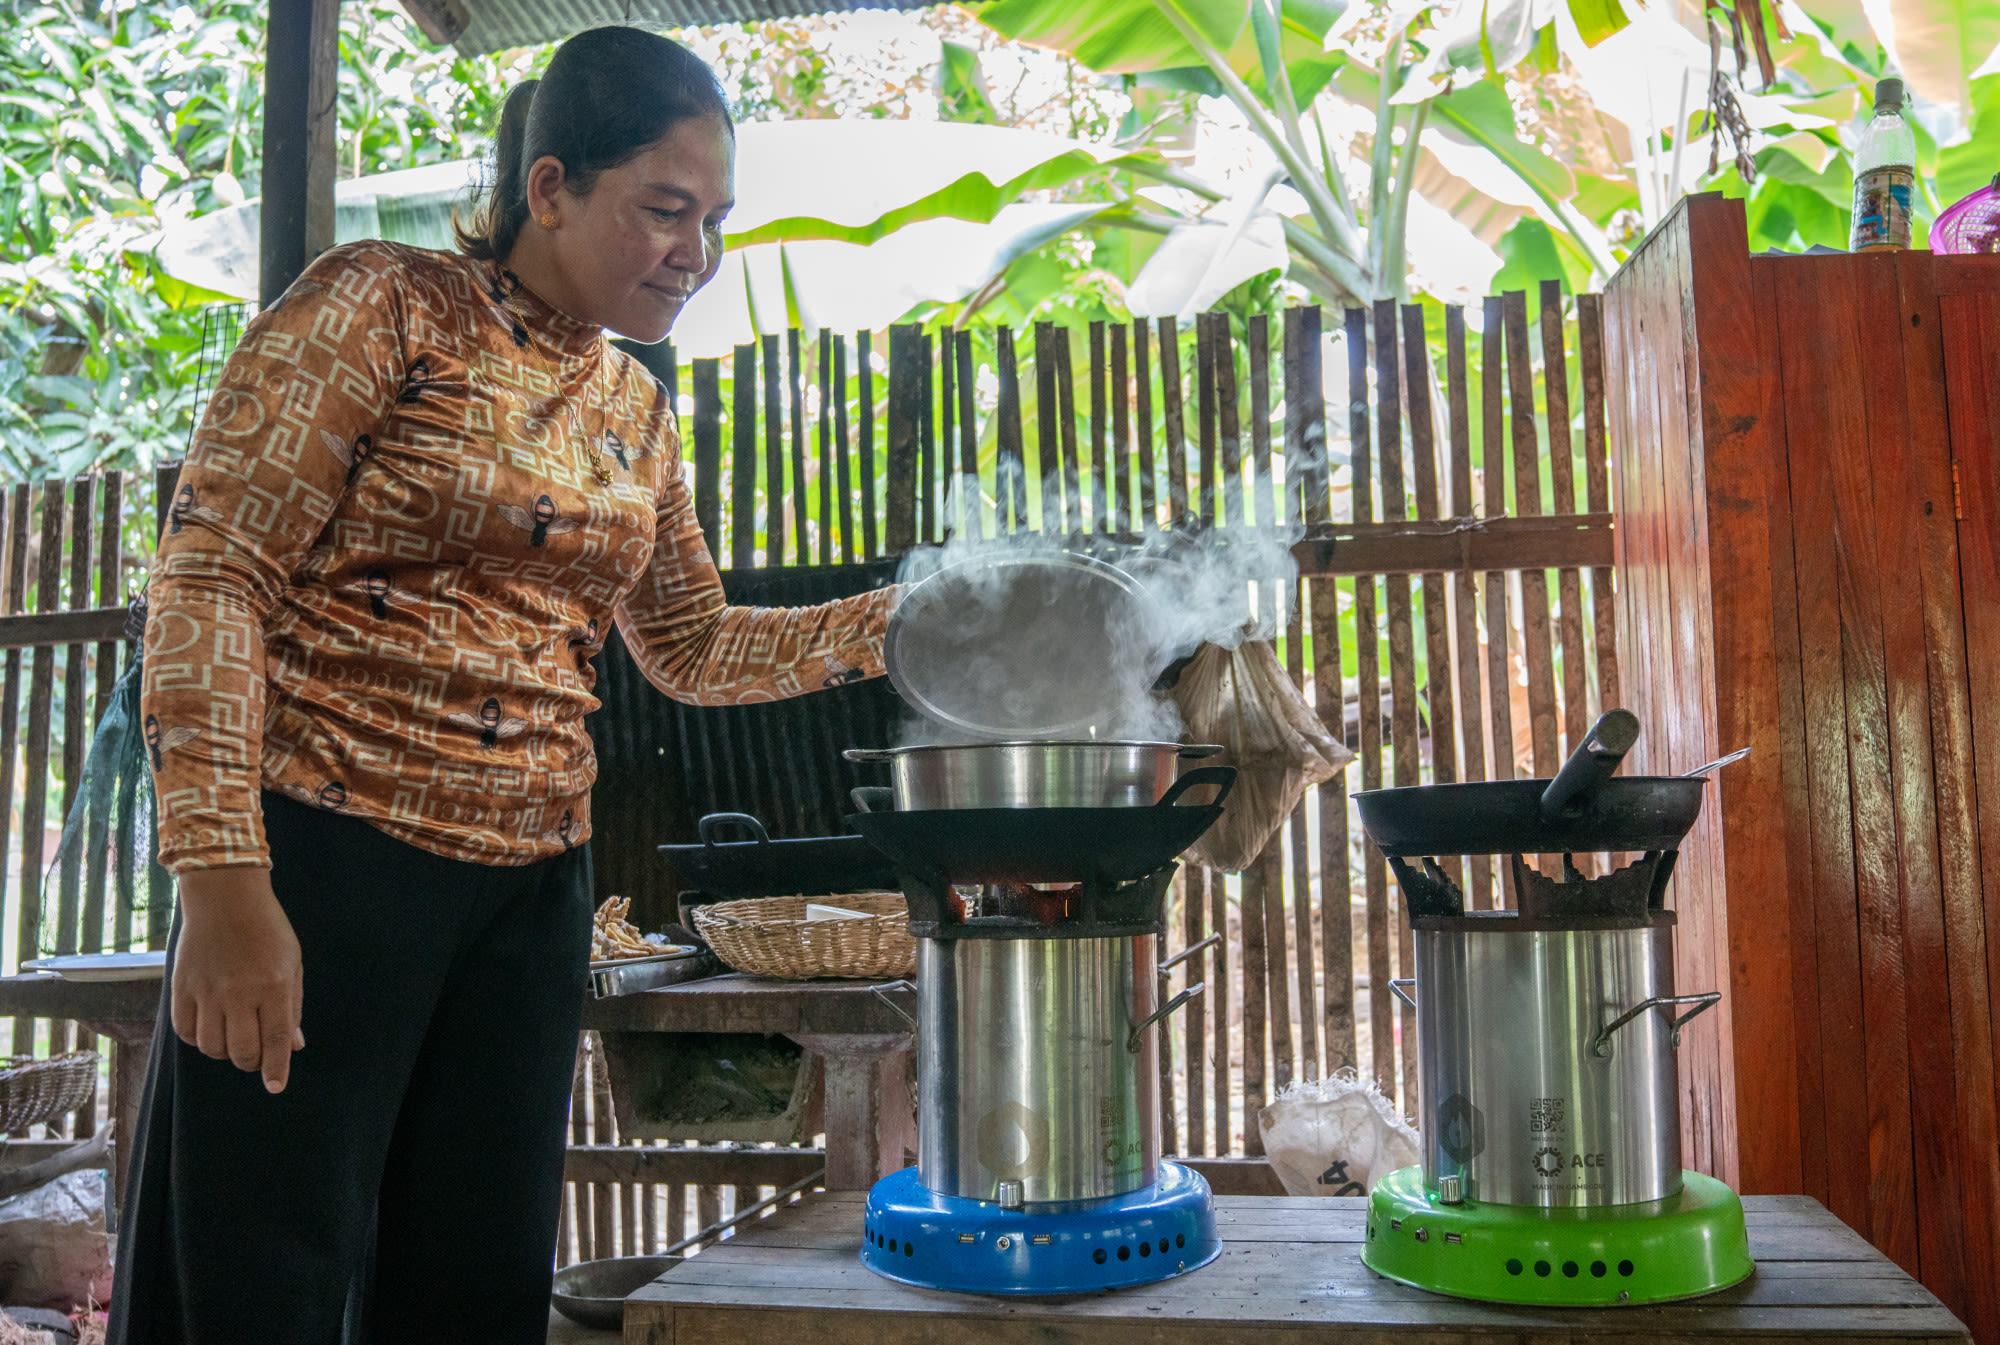 THACH USES HER CLEAN COOKSTOVE TO PREPARE DINNER FOR HER FAMILY.